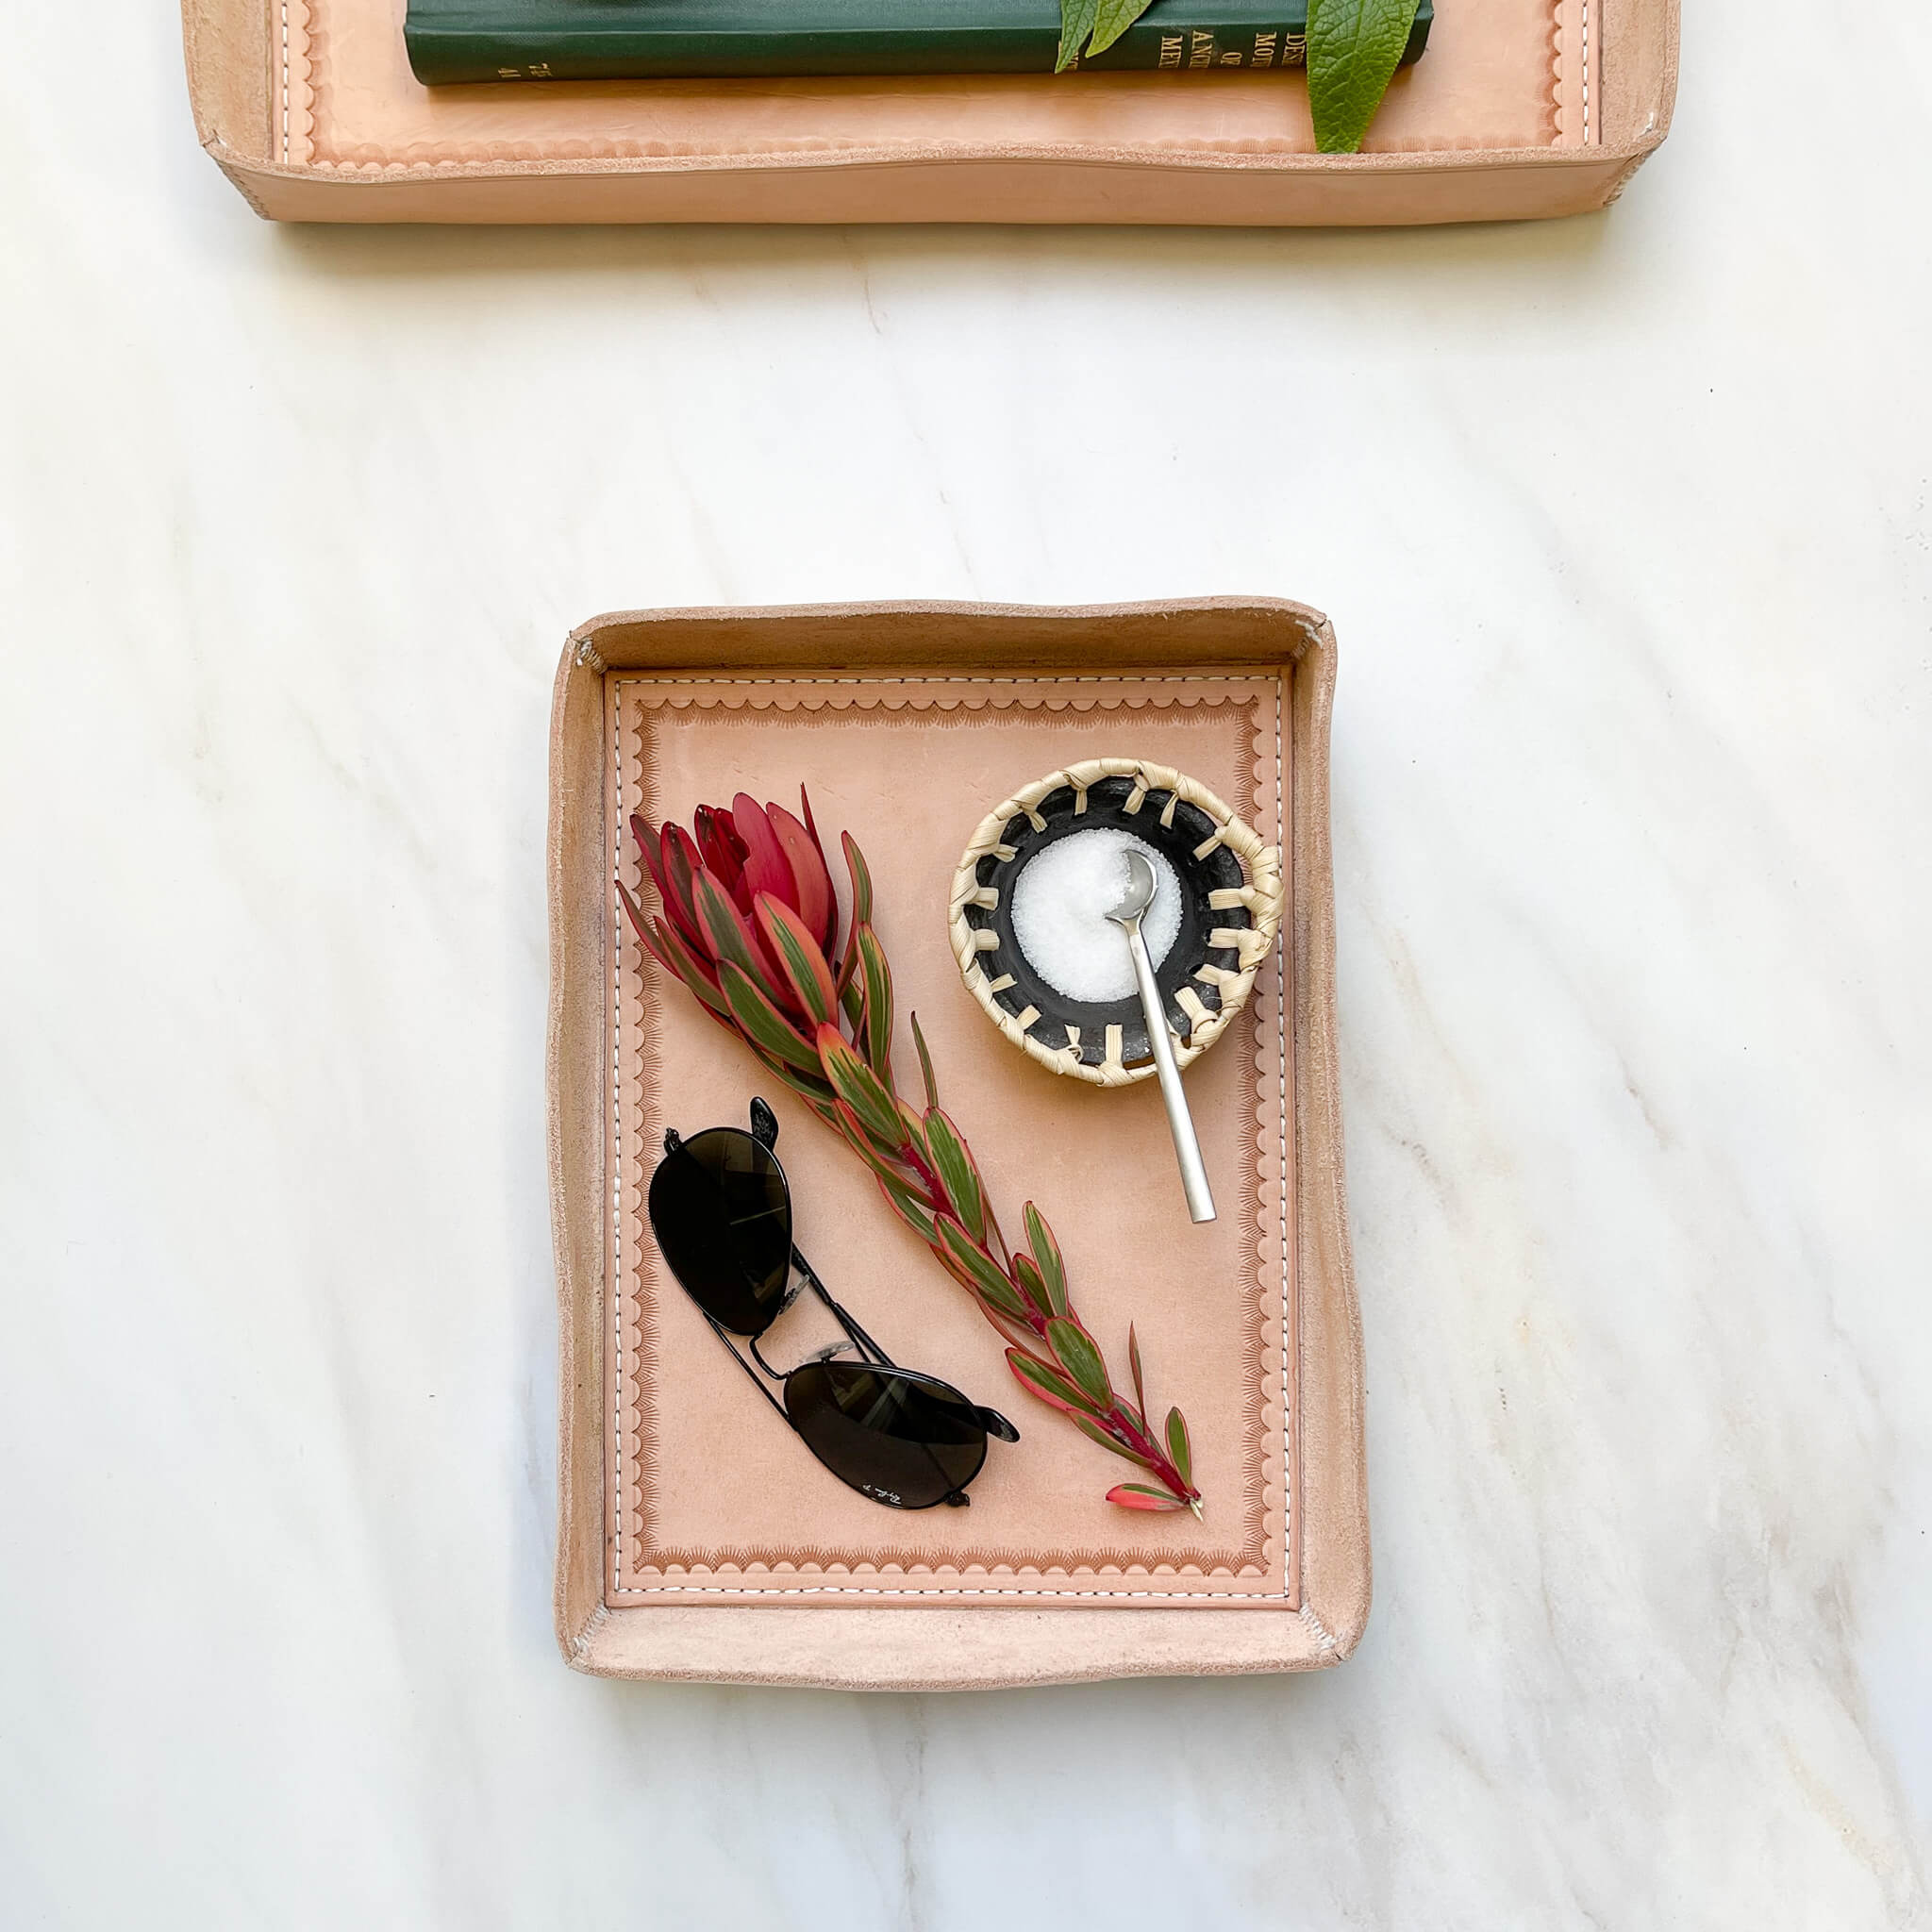 A Javier leather tray in size medium styled with a floral sprig, sunglasses and a salt dish.